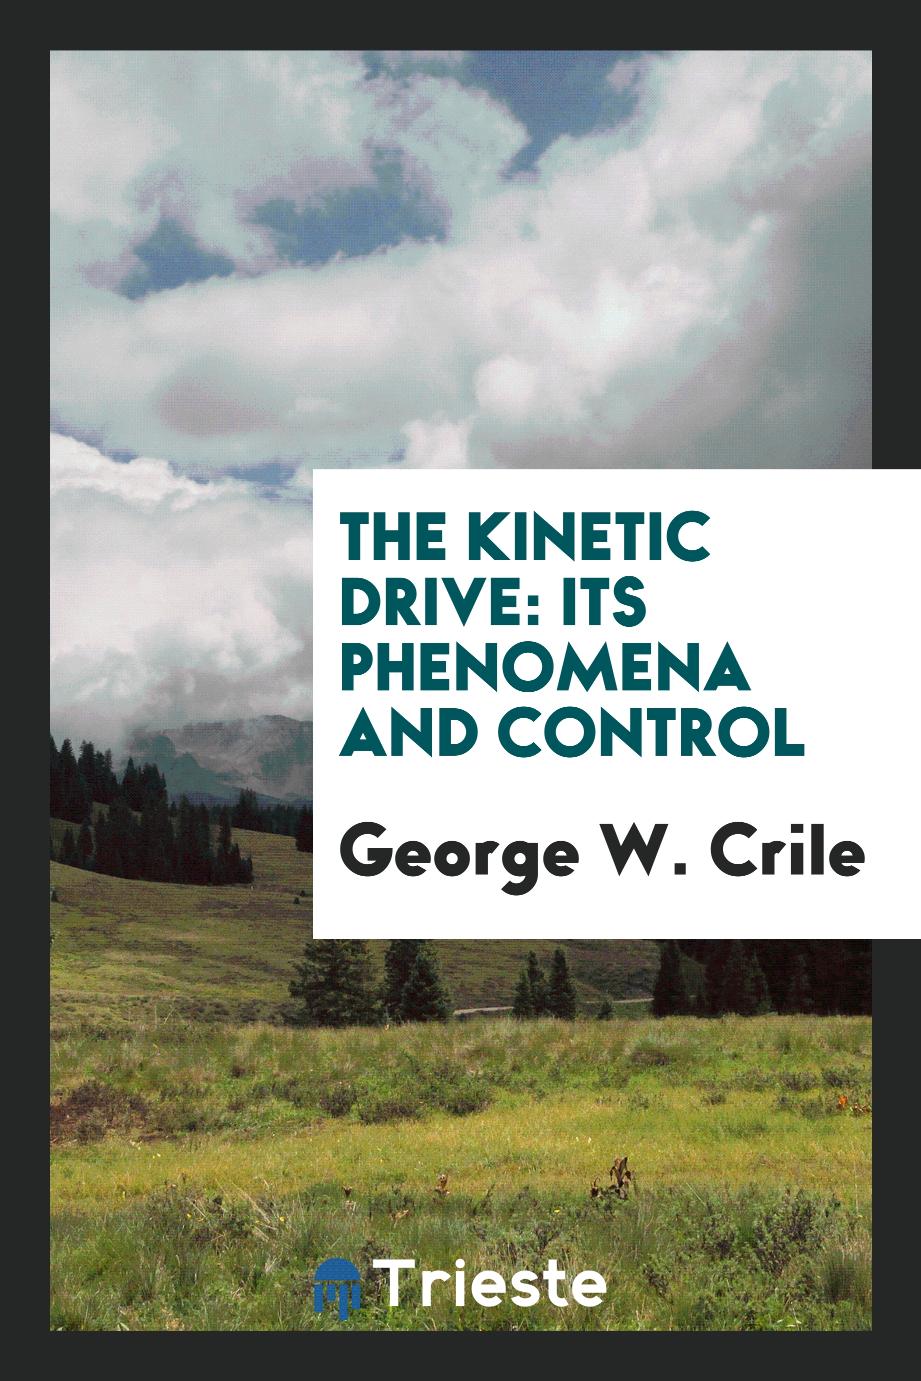 The Kinetic Drive: Its Phenomena and Control